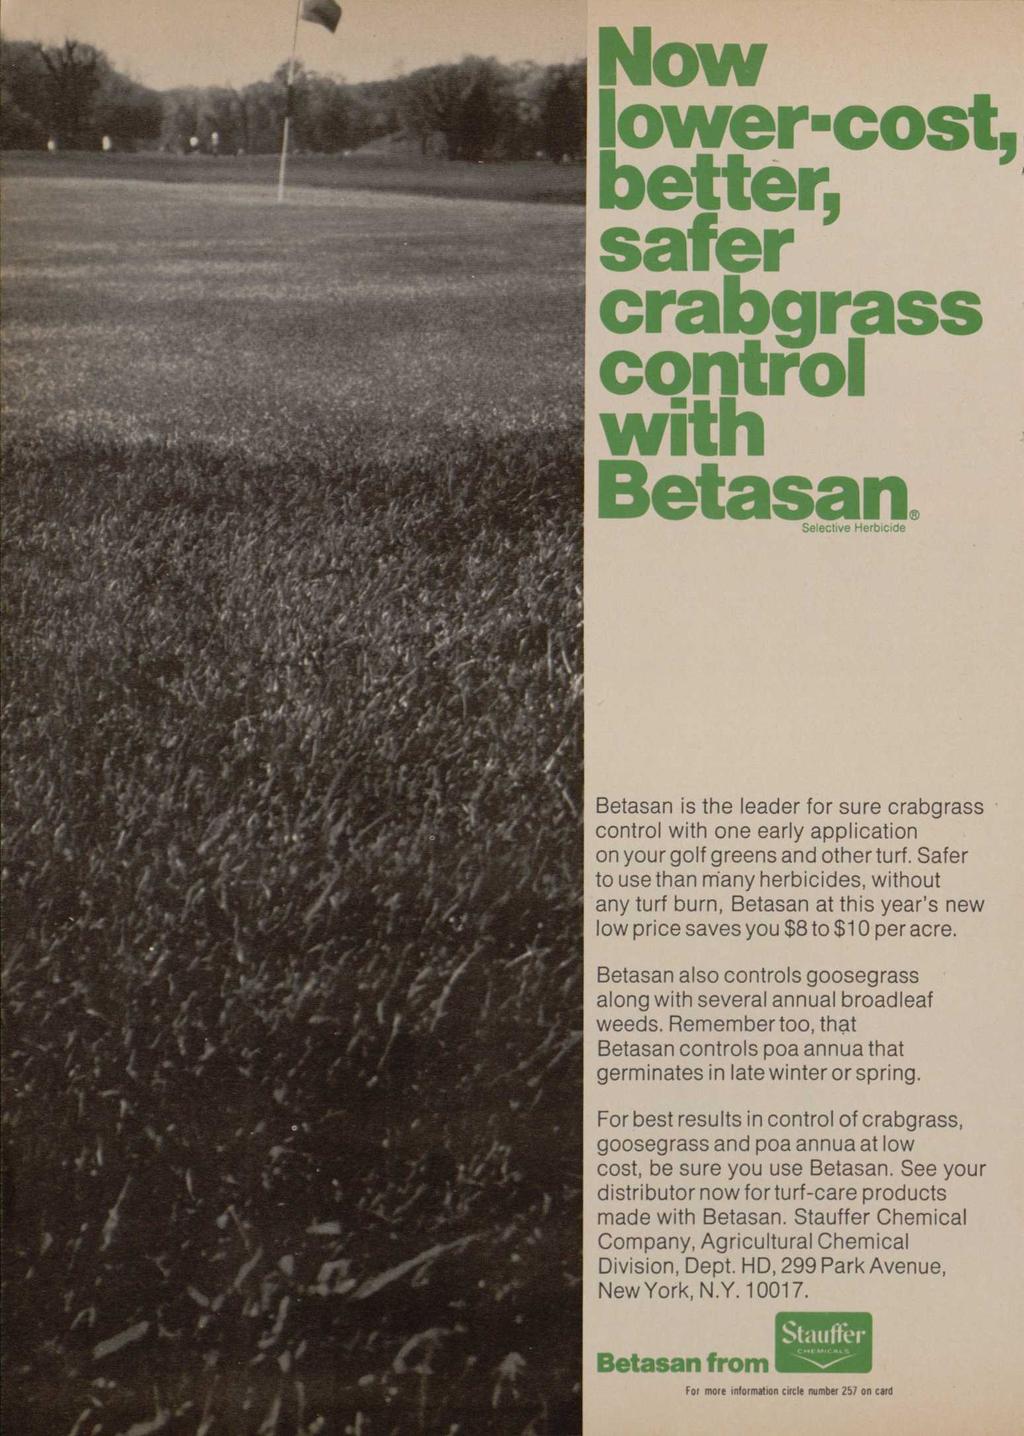 Now lower-cost better, safer crabgrass control with Betasan. Selective Herbicide Betasan is the leader for sure crabgrass control with one early application on your golf greens and other turf.